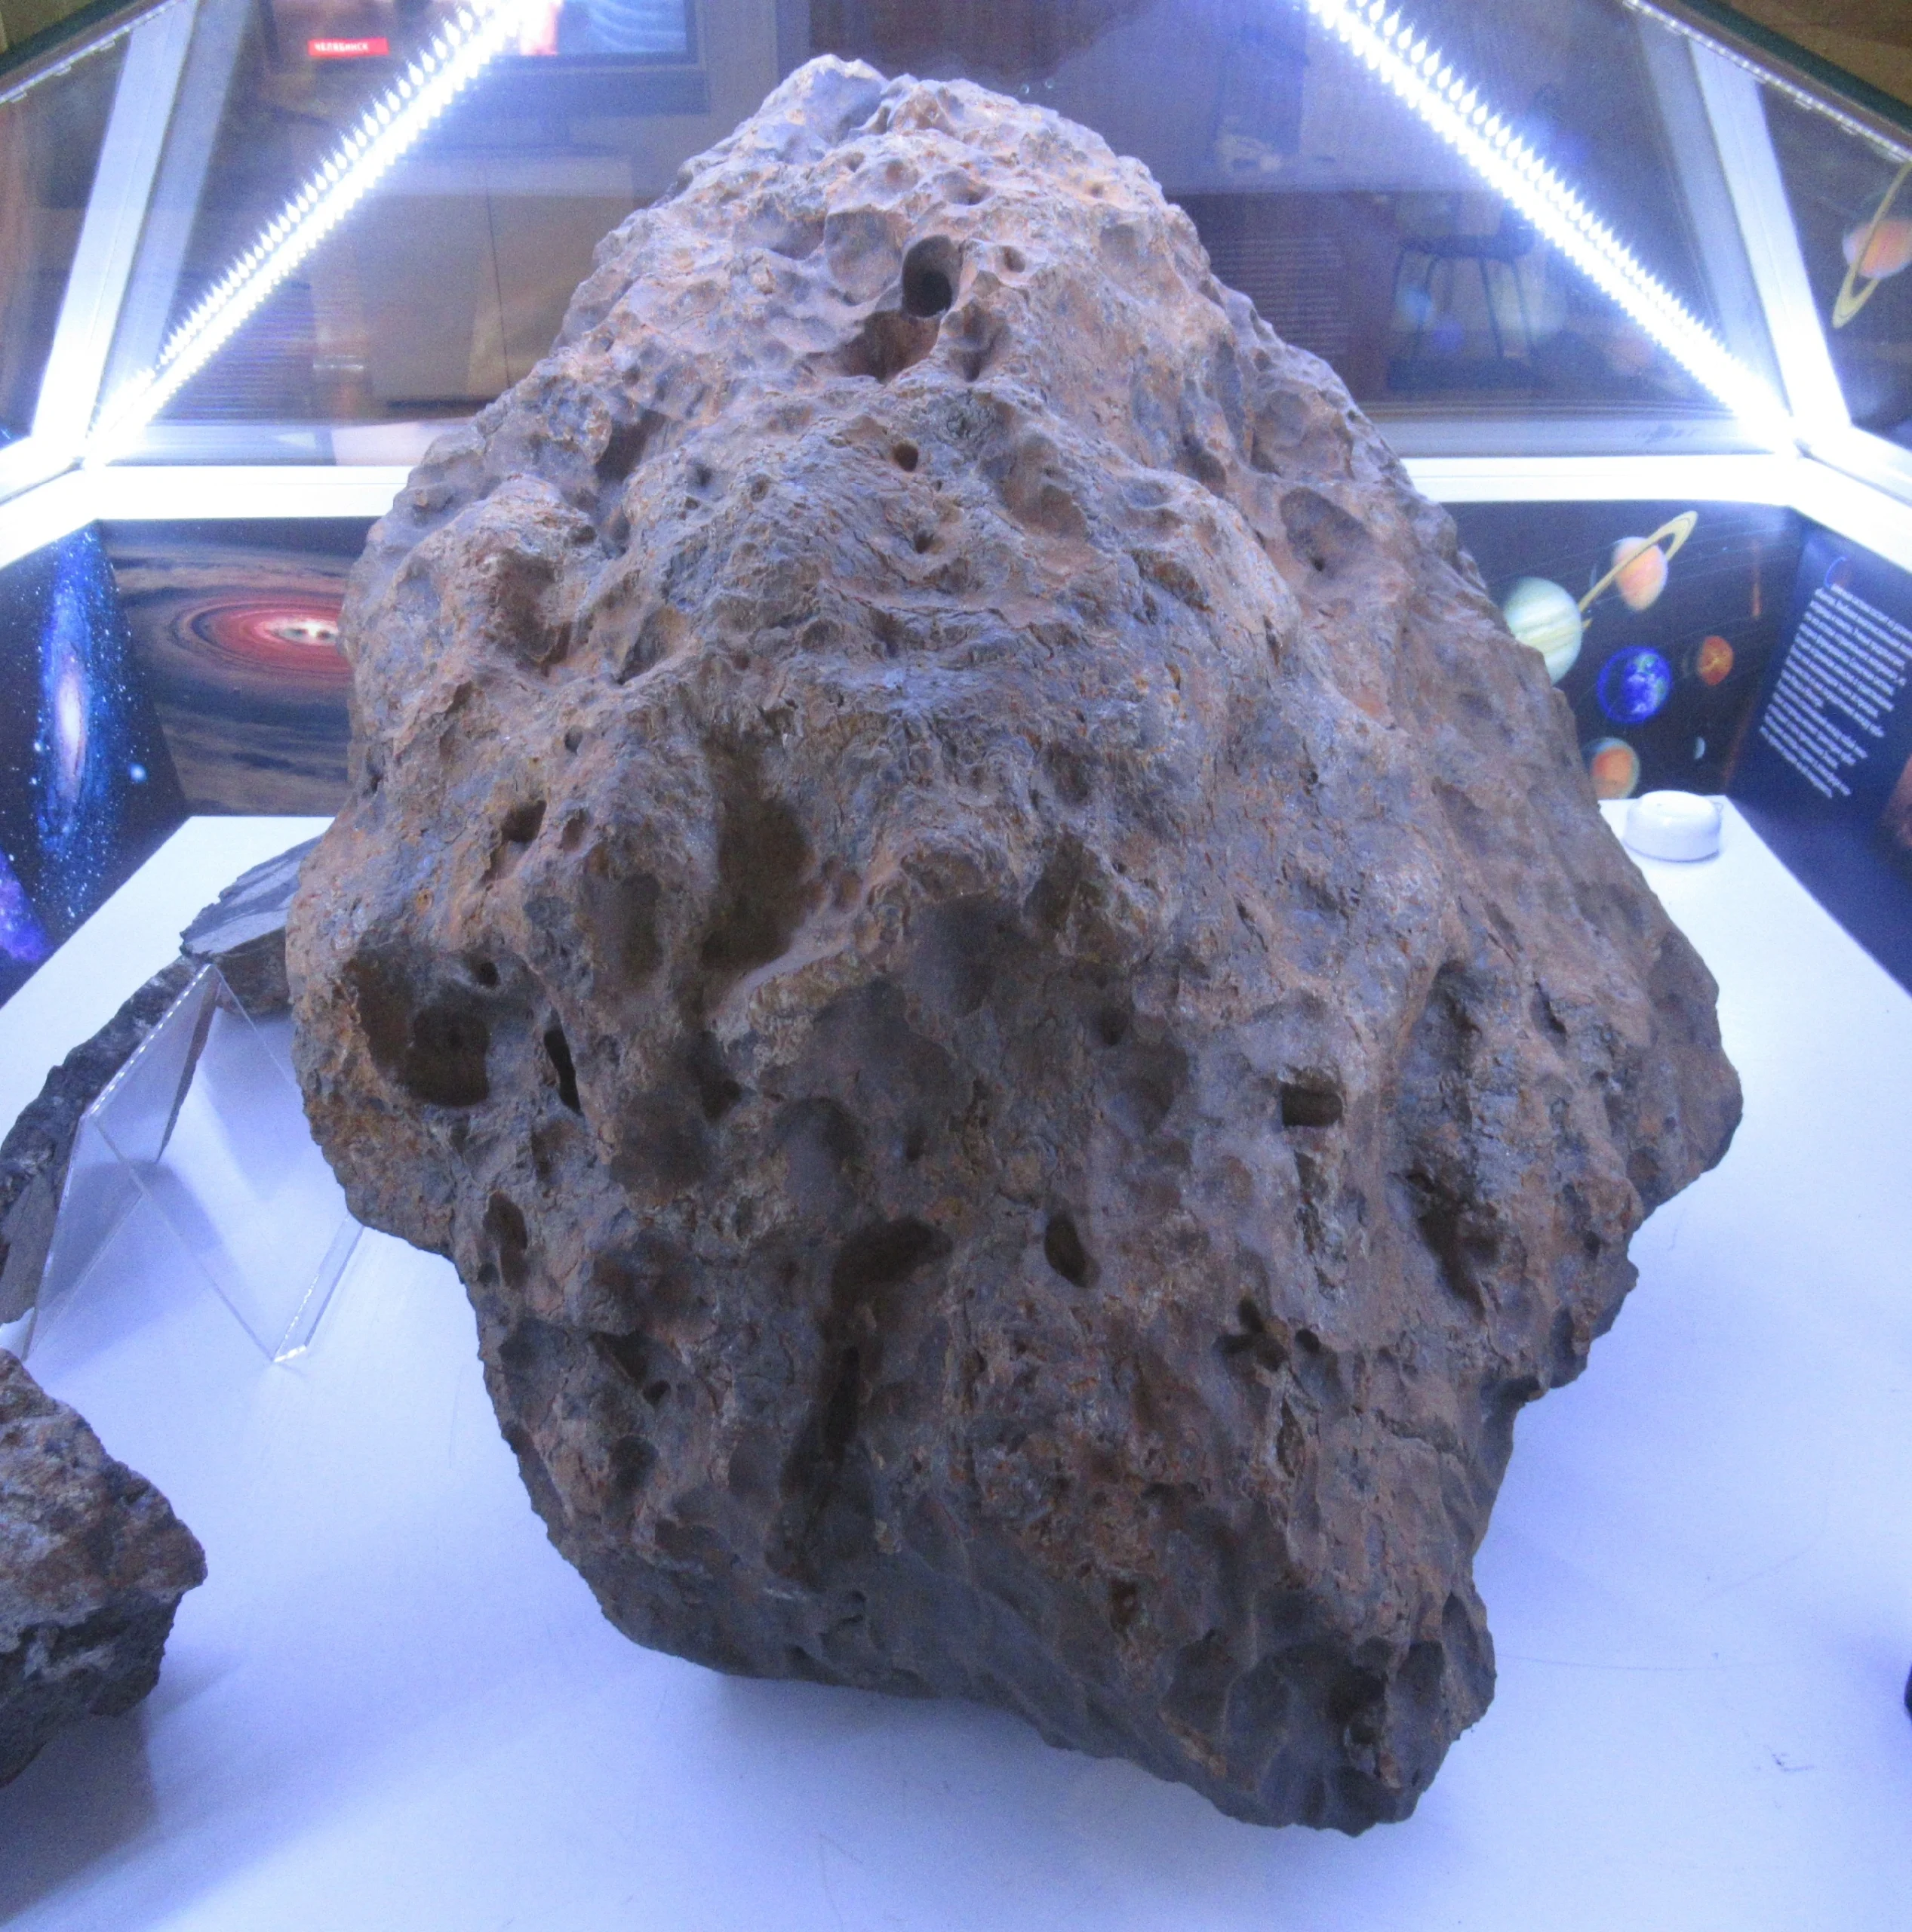 This is a picture of a salvaged meteorite specimen from the 2013 Chelyabinsk impact.